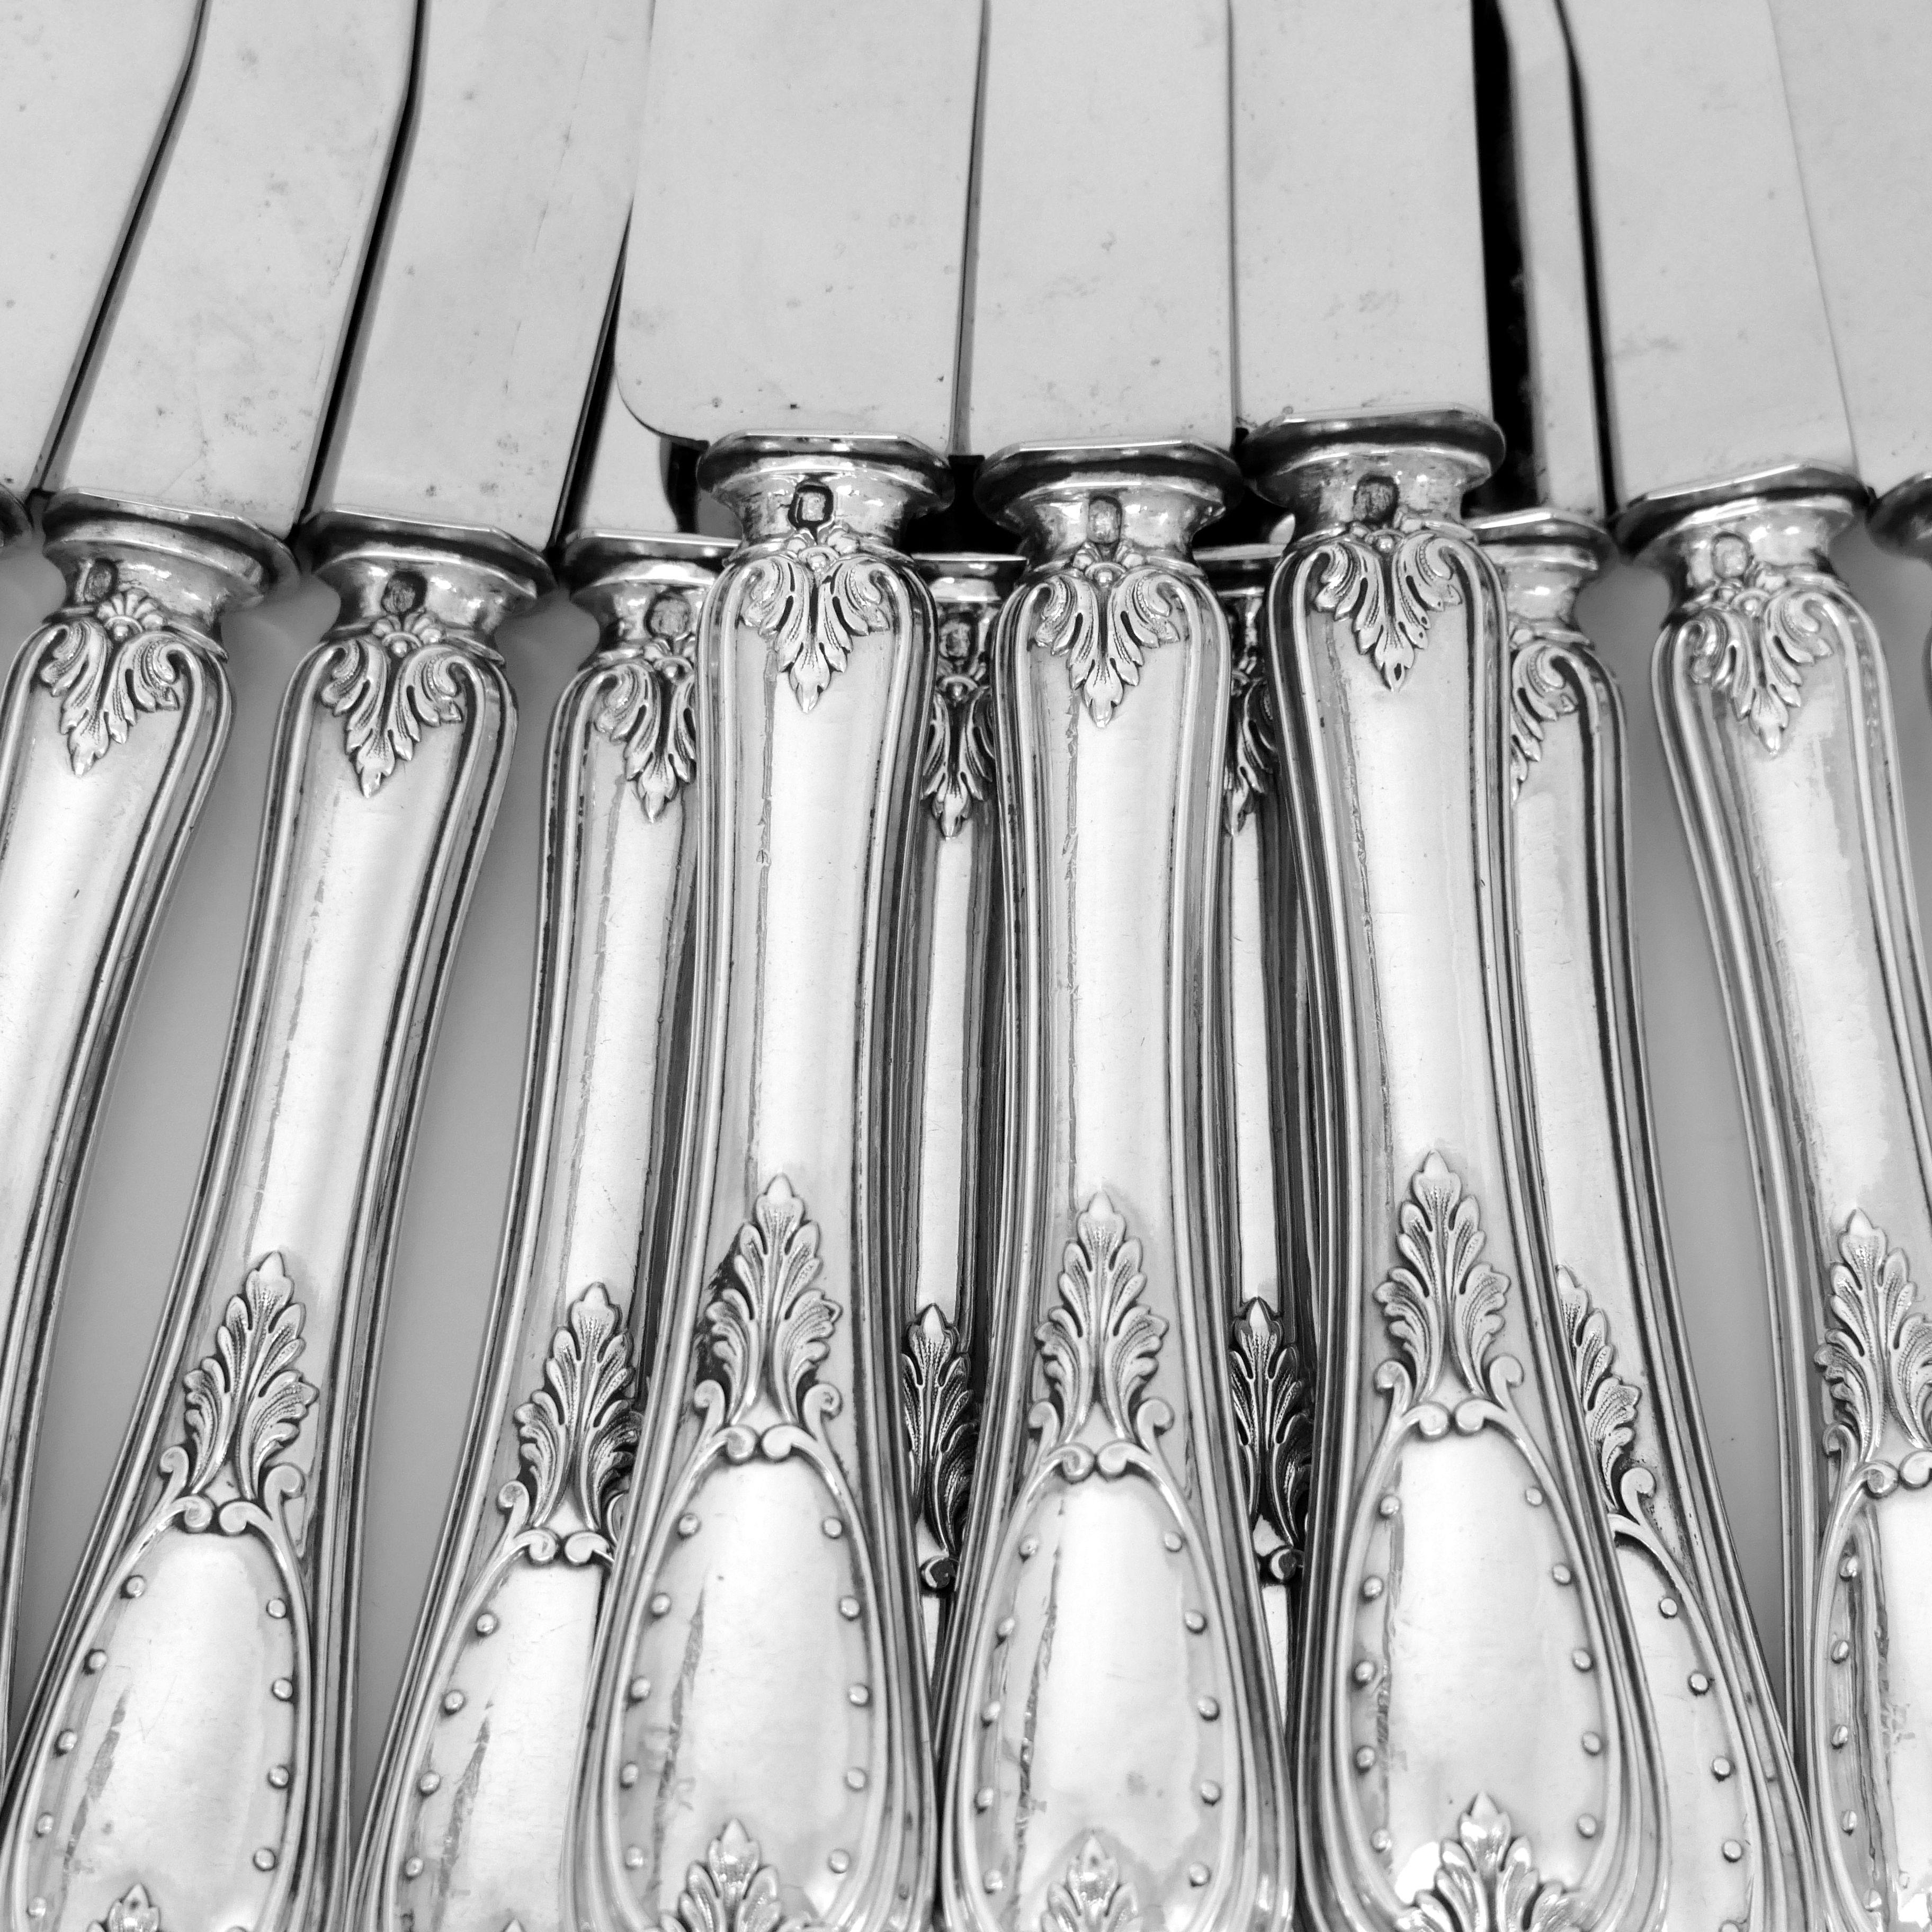 Coignet French Sterling Silver Dinner Knife Set 12 Pieces with Box, Neoclassical 2